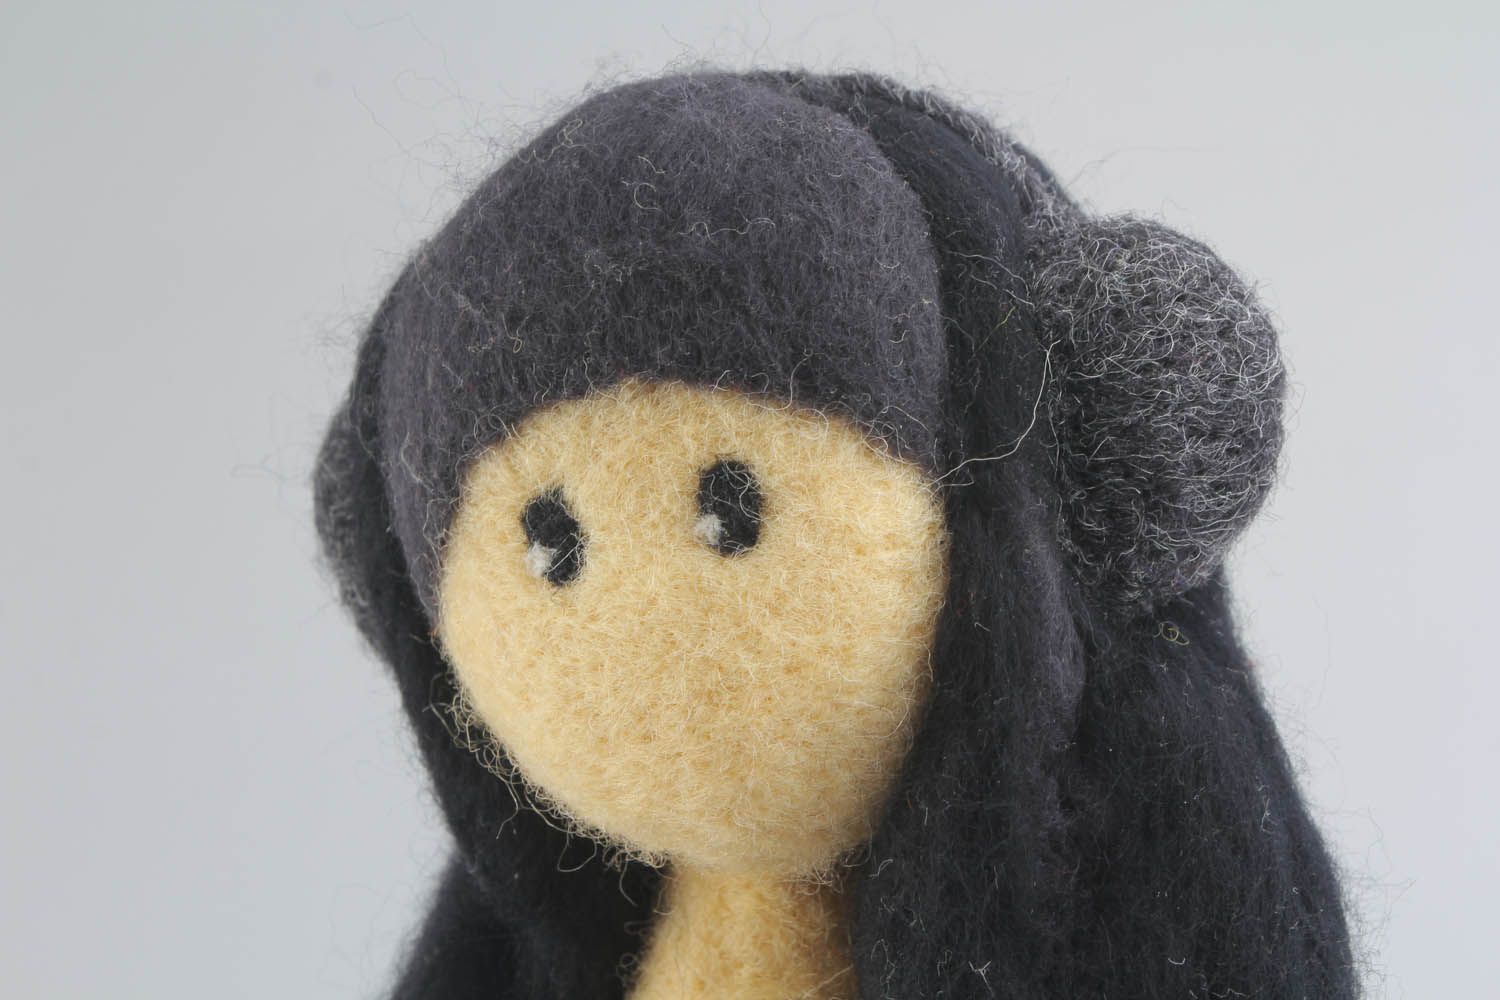 Toy made using felting technique photo 4